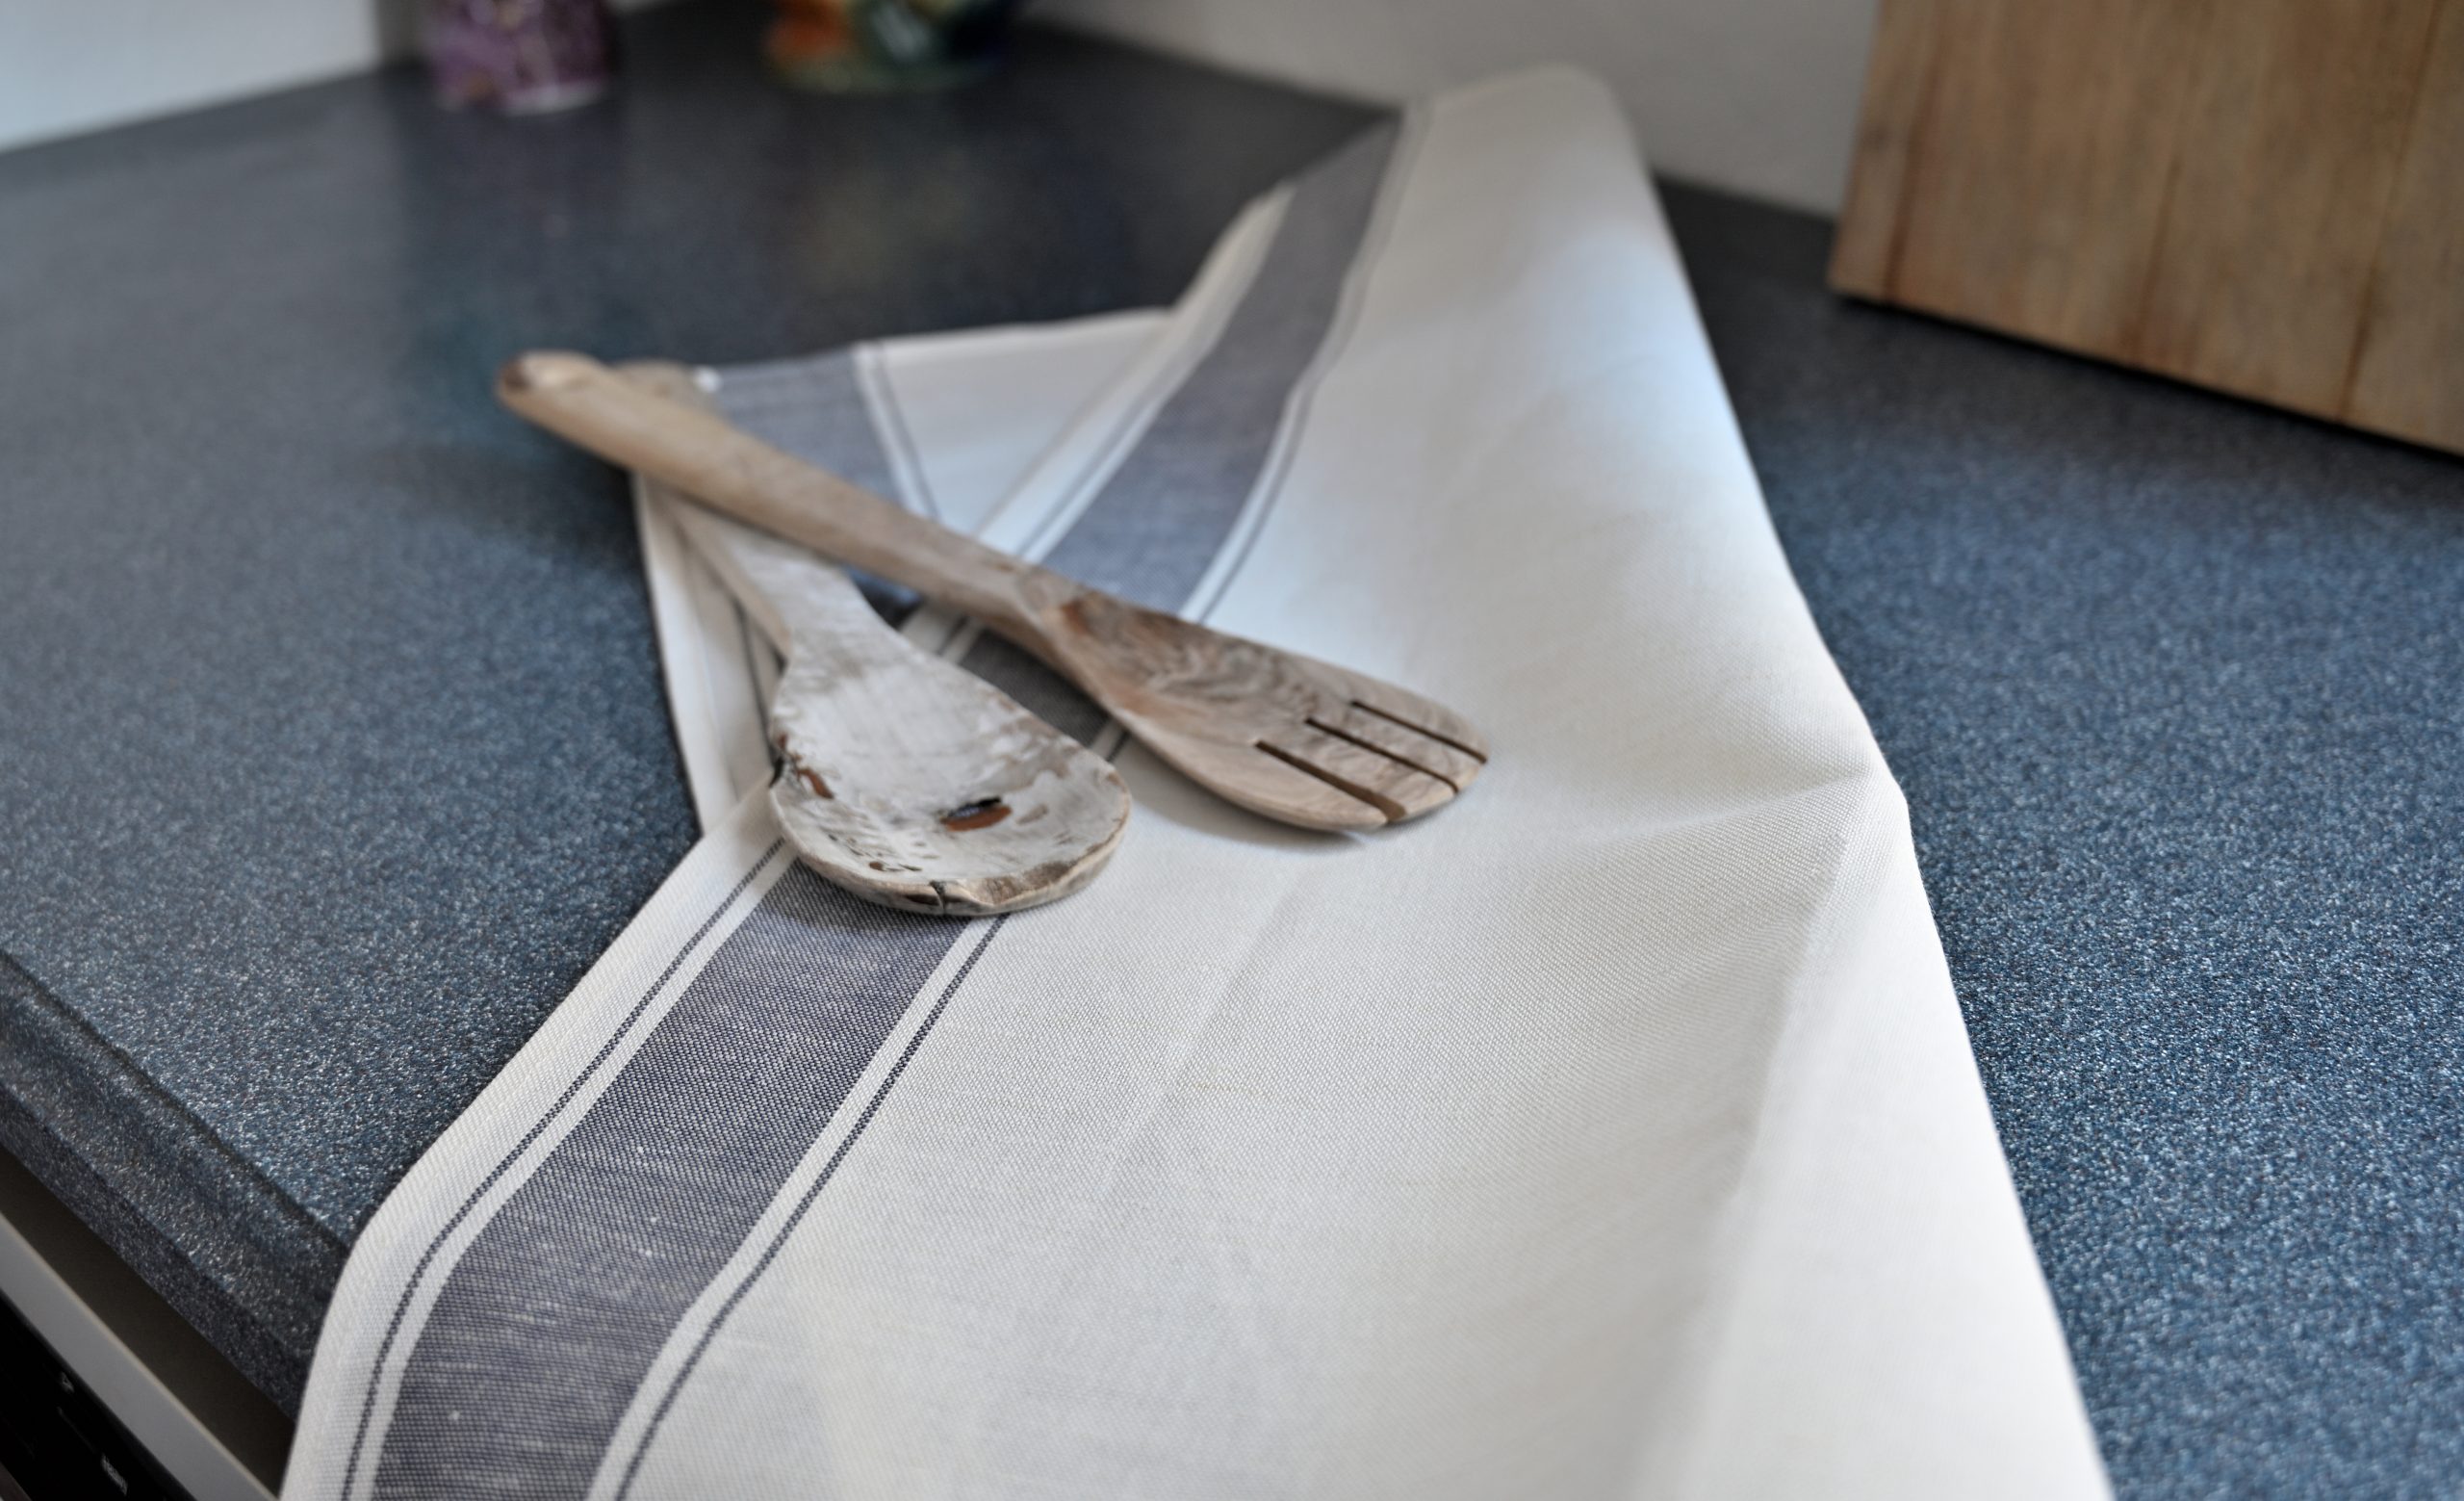 https://nestingthreads.com/wp-content/uploads/2018/06/Border-Charcoal-Grey-and-Oyster-Linen-and-Cotton-Tea-Towel-H451CG018028BBR10OY-02-1-scaled.jpg